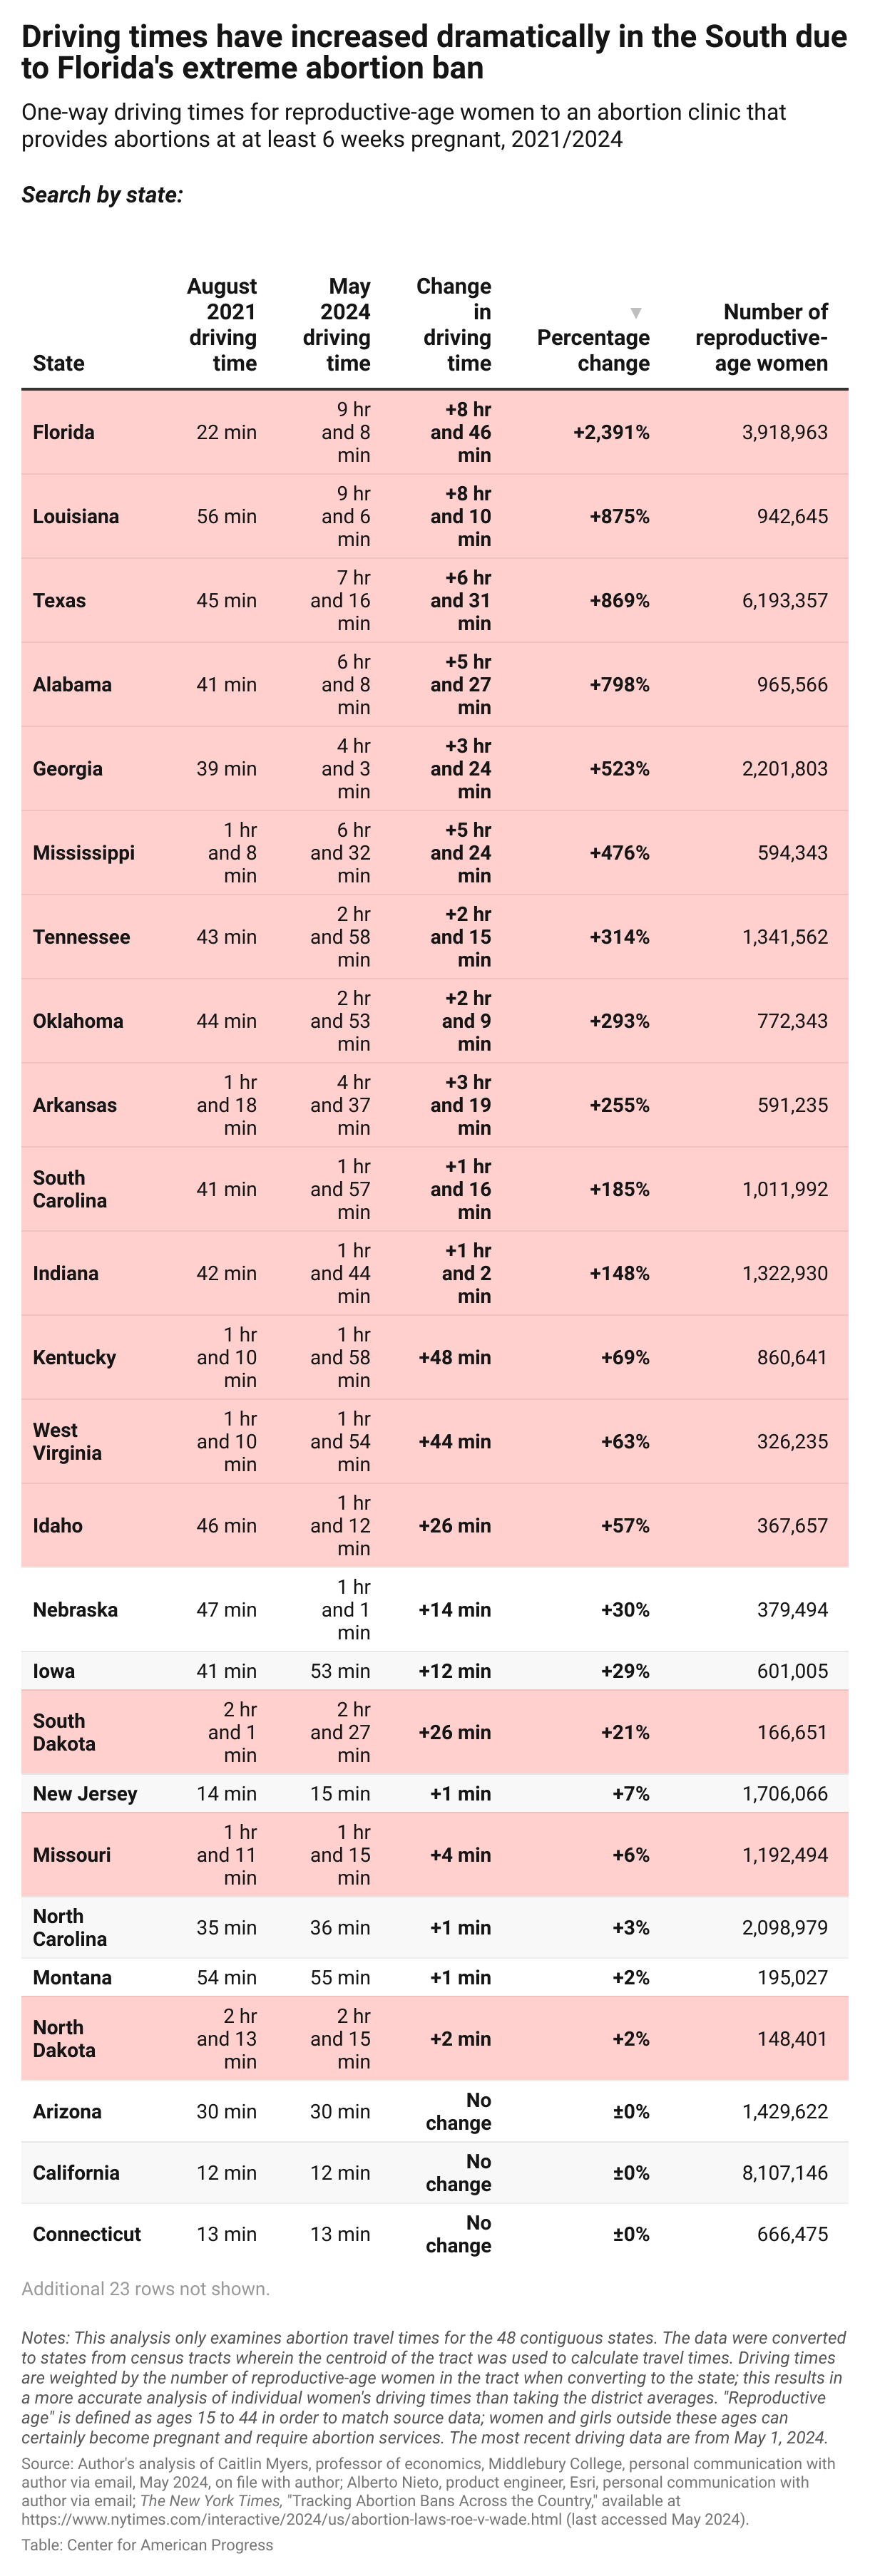 A table comparing driving times to abortion clinics in the 48 contiguous states in August 2021 and in May 2024, showing that driving times increased by more than 500 percent in five states in the South. 